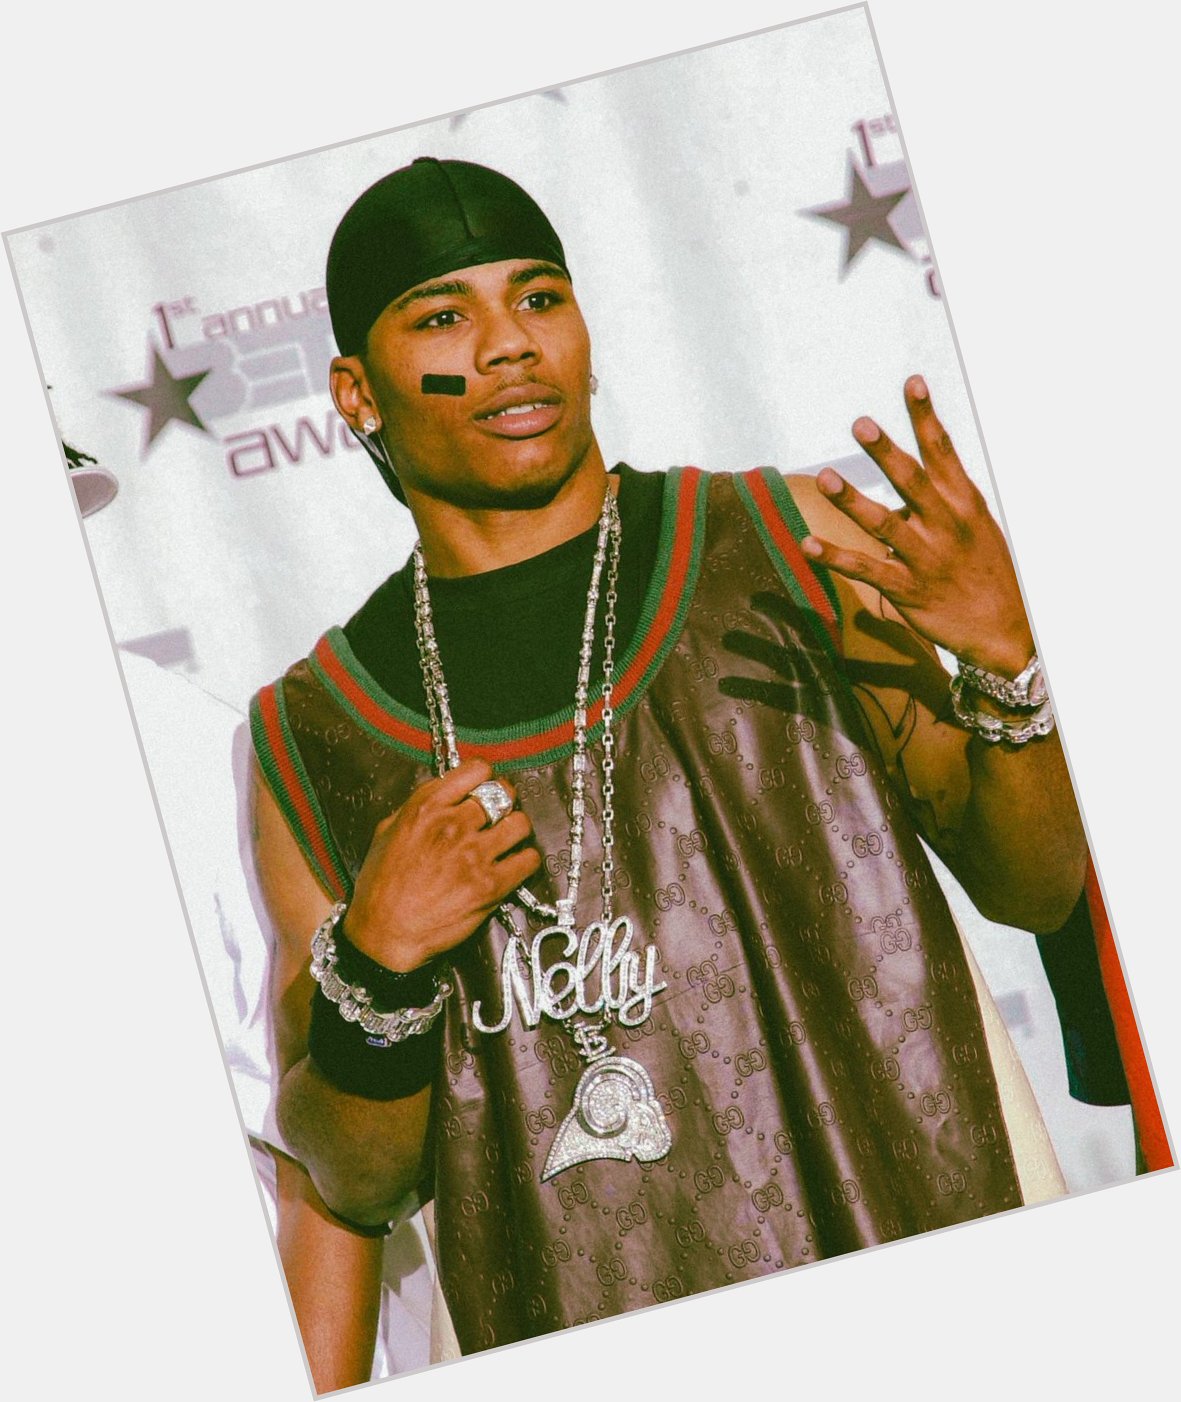 Happy 48th Birthday, Nelly!

What s your favorite song of his? 